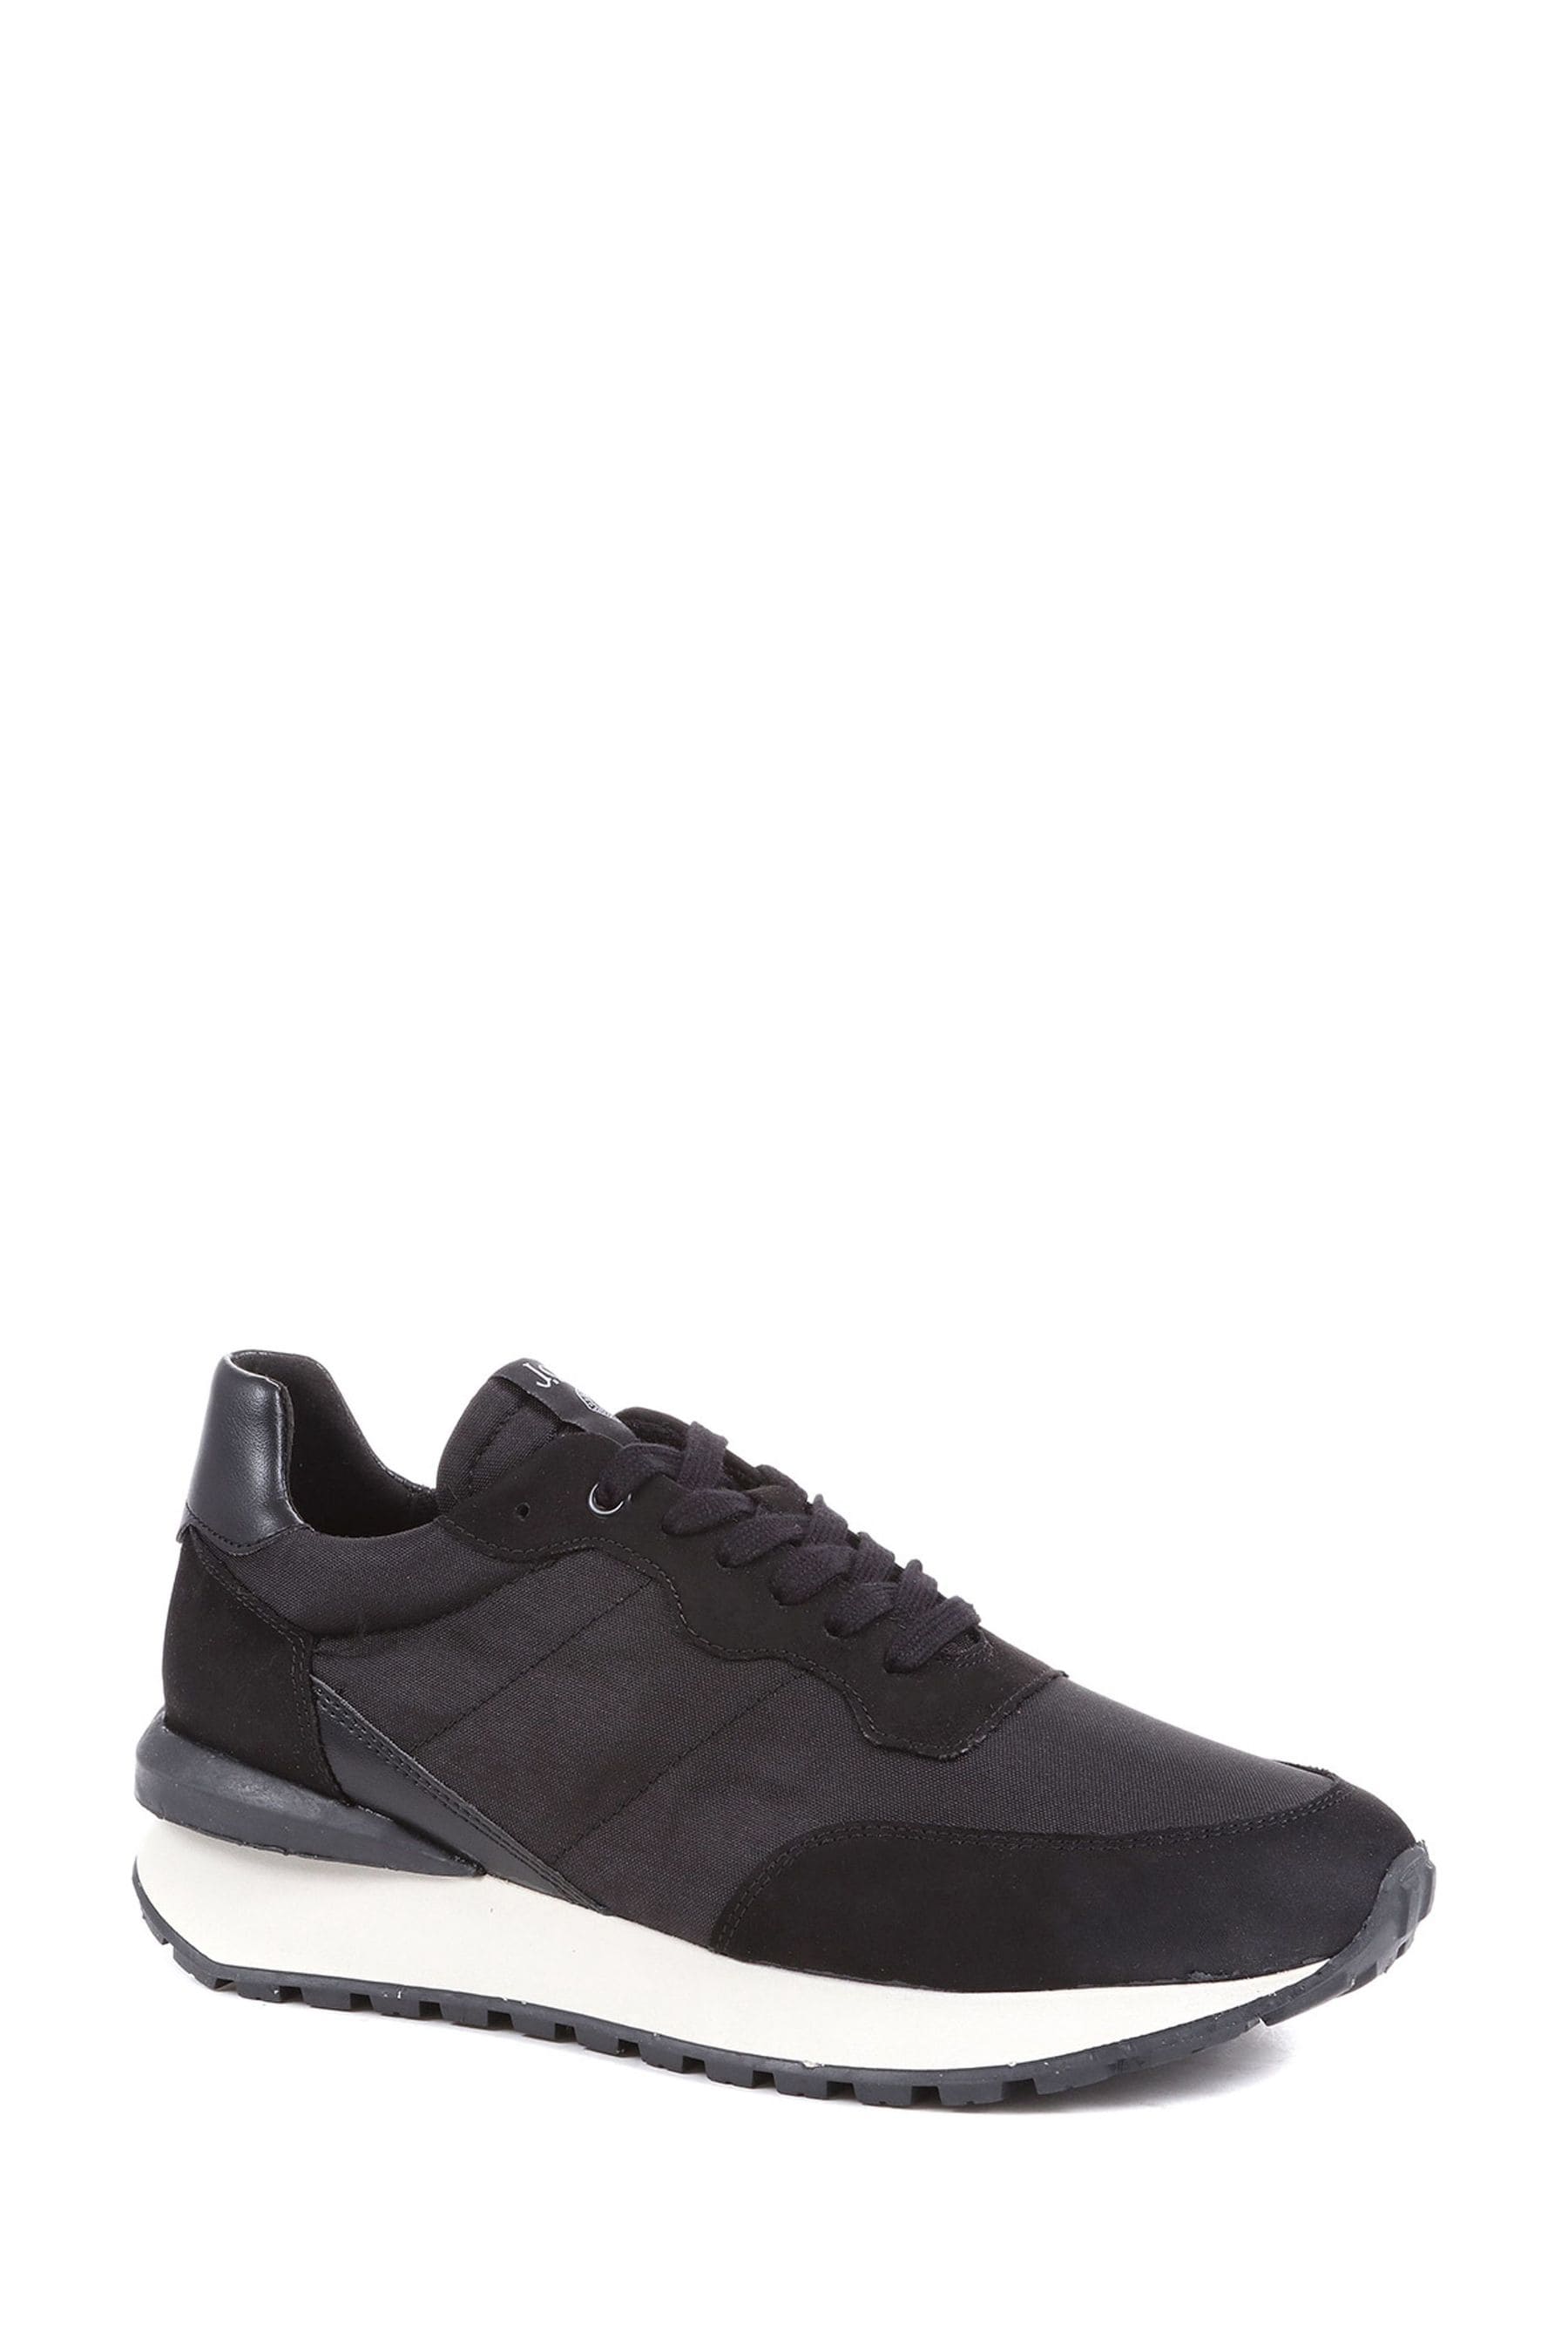 Buy Jones Bootmaker Tynemouth Apple Leather Black Trainers from the ...